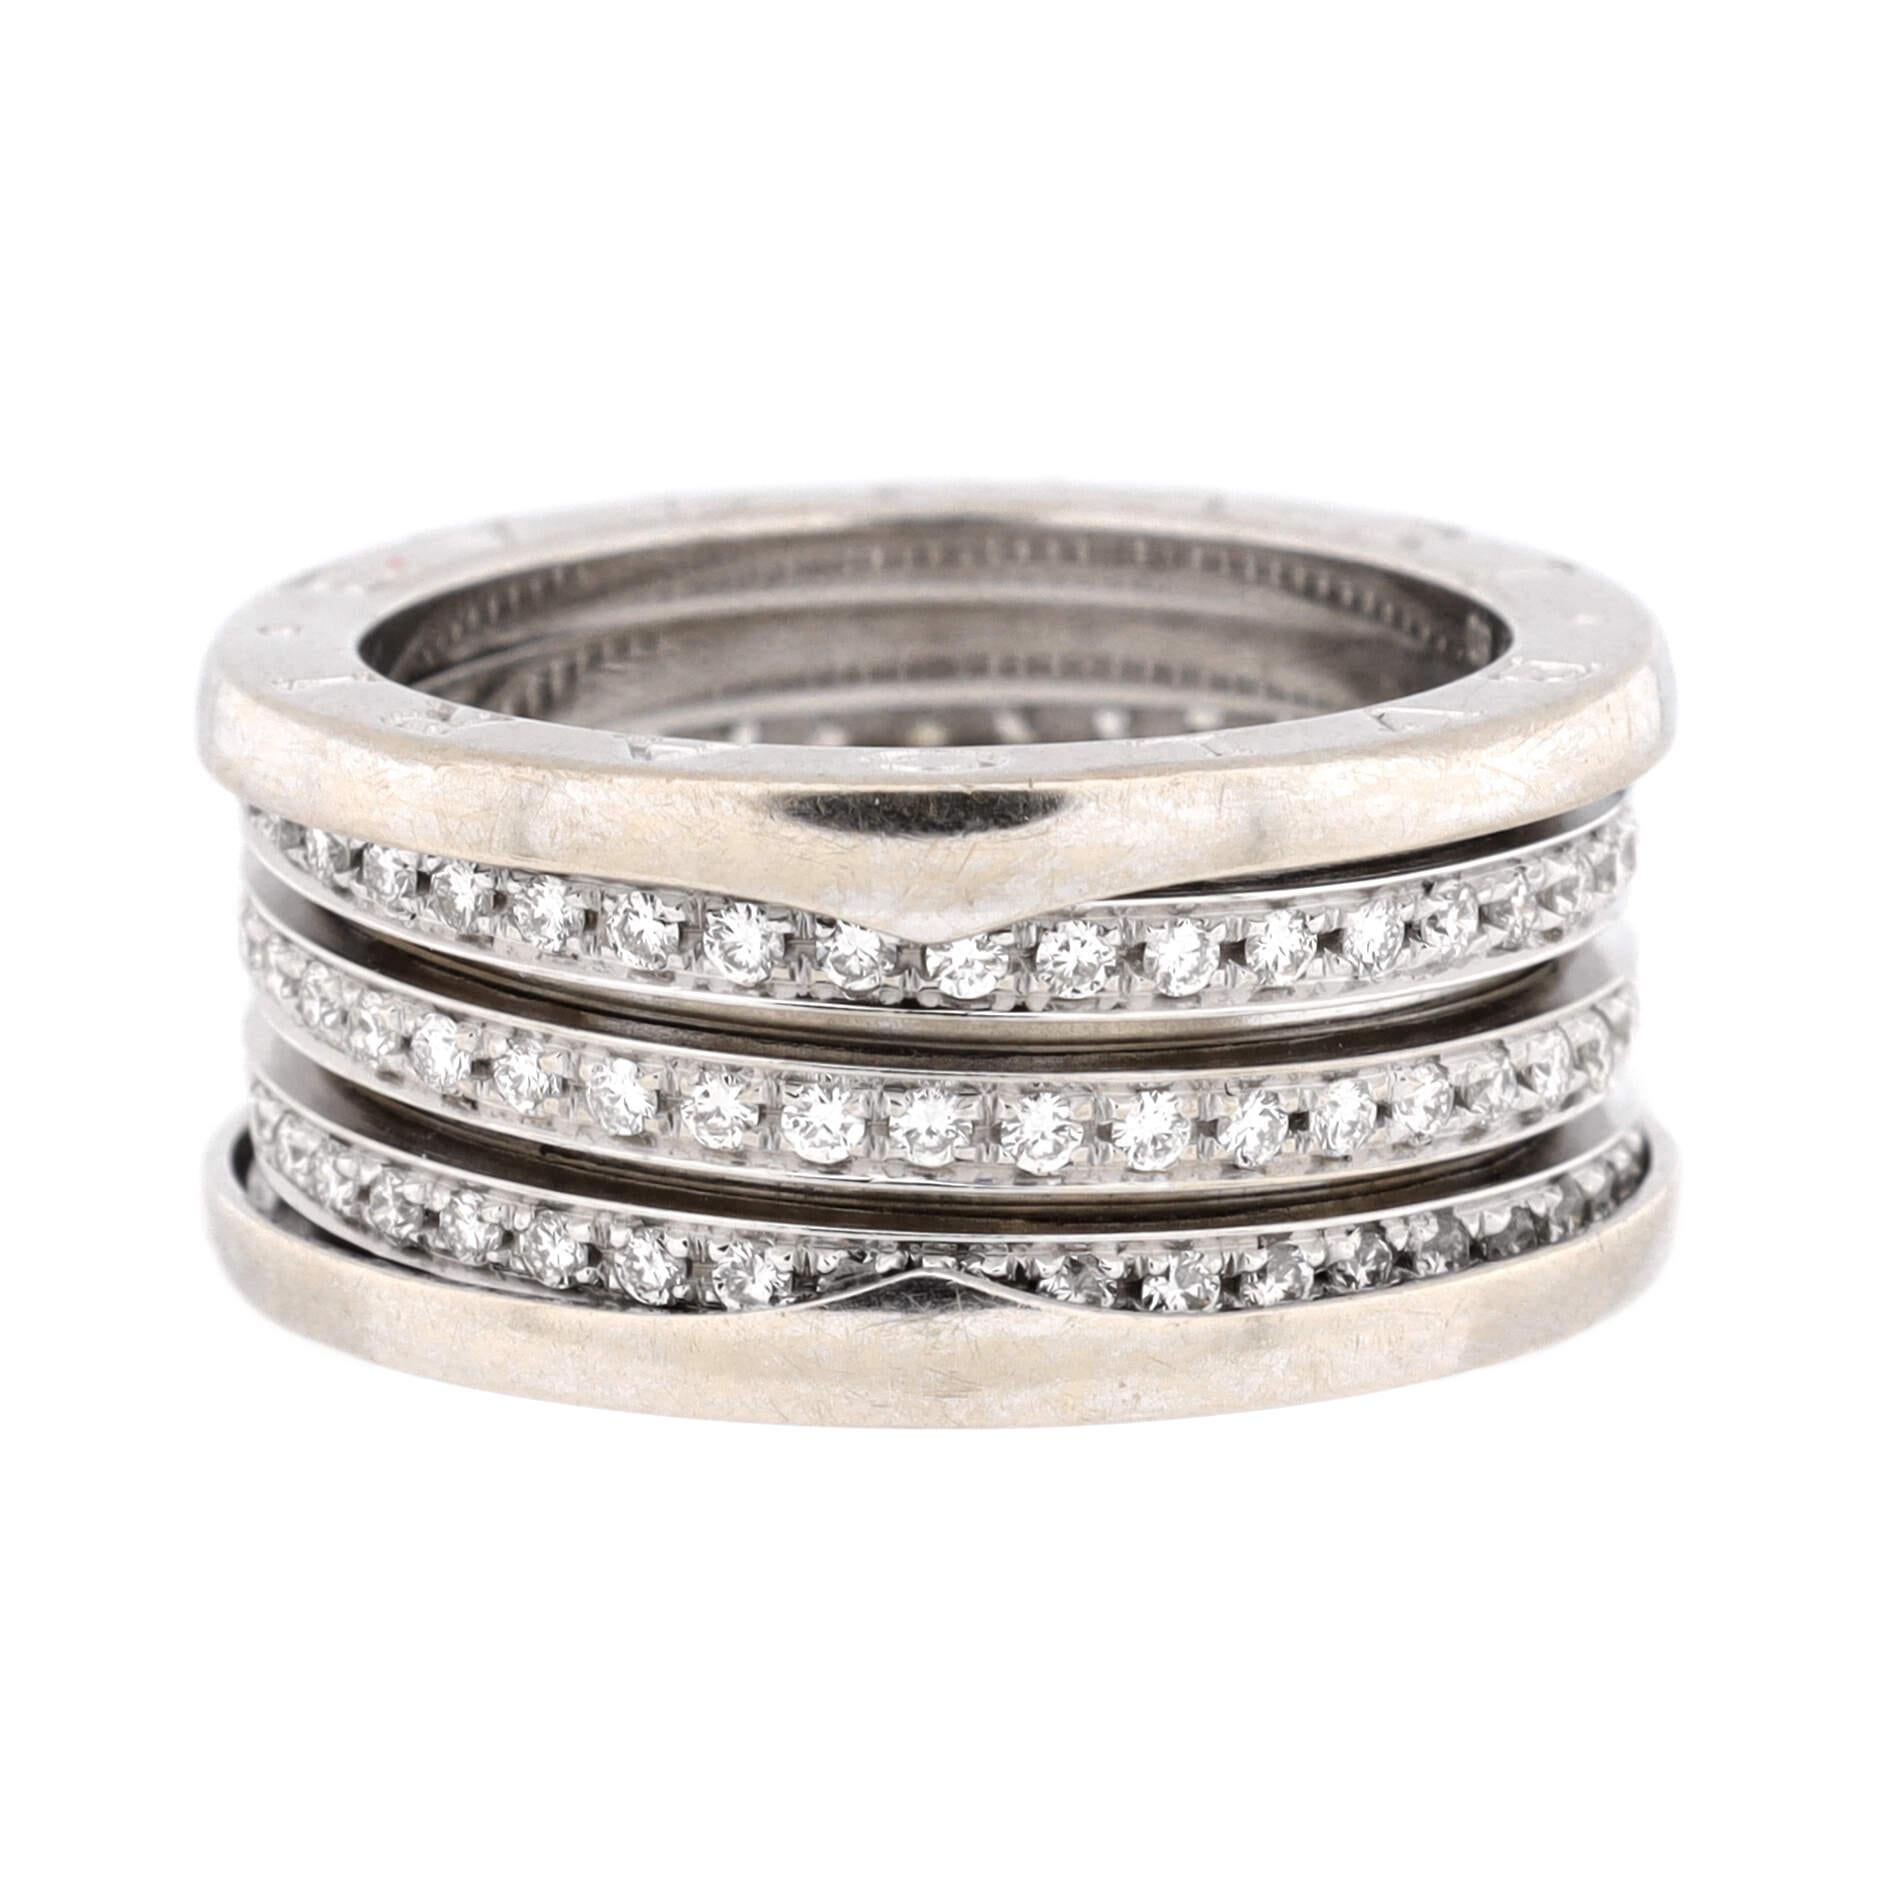 Condition: Good. Moderately heavy wear and discoloration throughout.
Accessories: No Accessories
Measurements: Size: 9 - 60, Width: 12.00 mm
Designer: Bvlgari
Model: B.Zero1 Four Band Ring 18K White Gold and Diamonds
Exterior Color: White Gold
Item